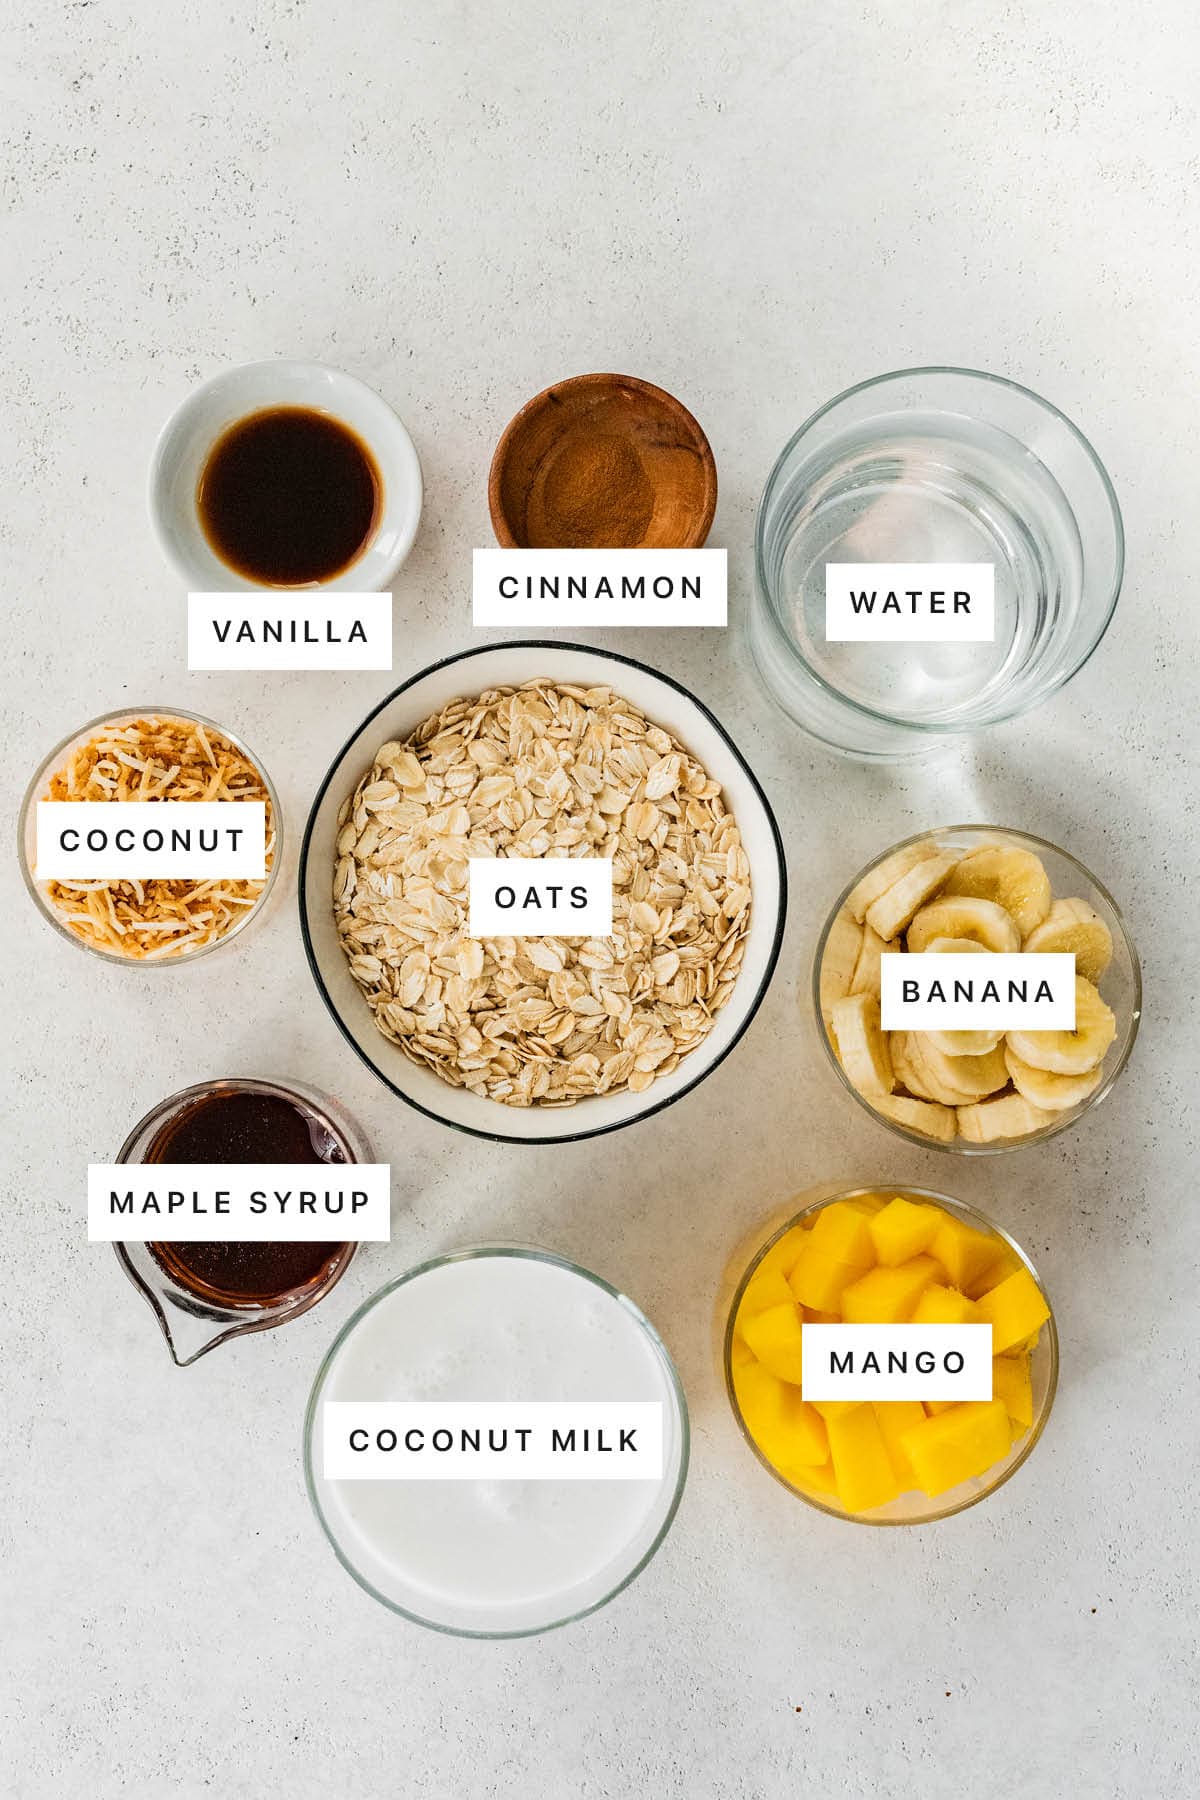 Ingredients measured out to make Tropical Oatmeal: vanilla, cinnamon, water, coconut, oats, banana, maple syrup, coconut milk and mango.